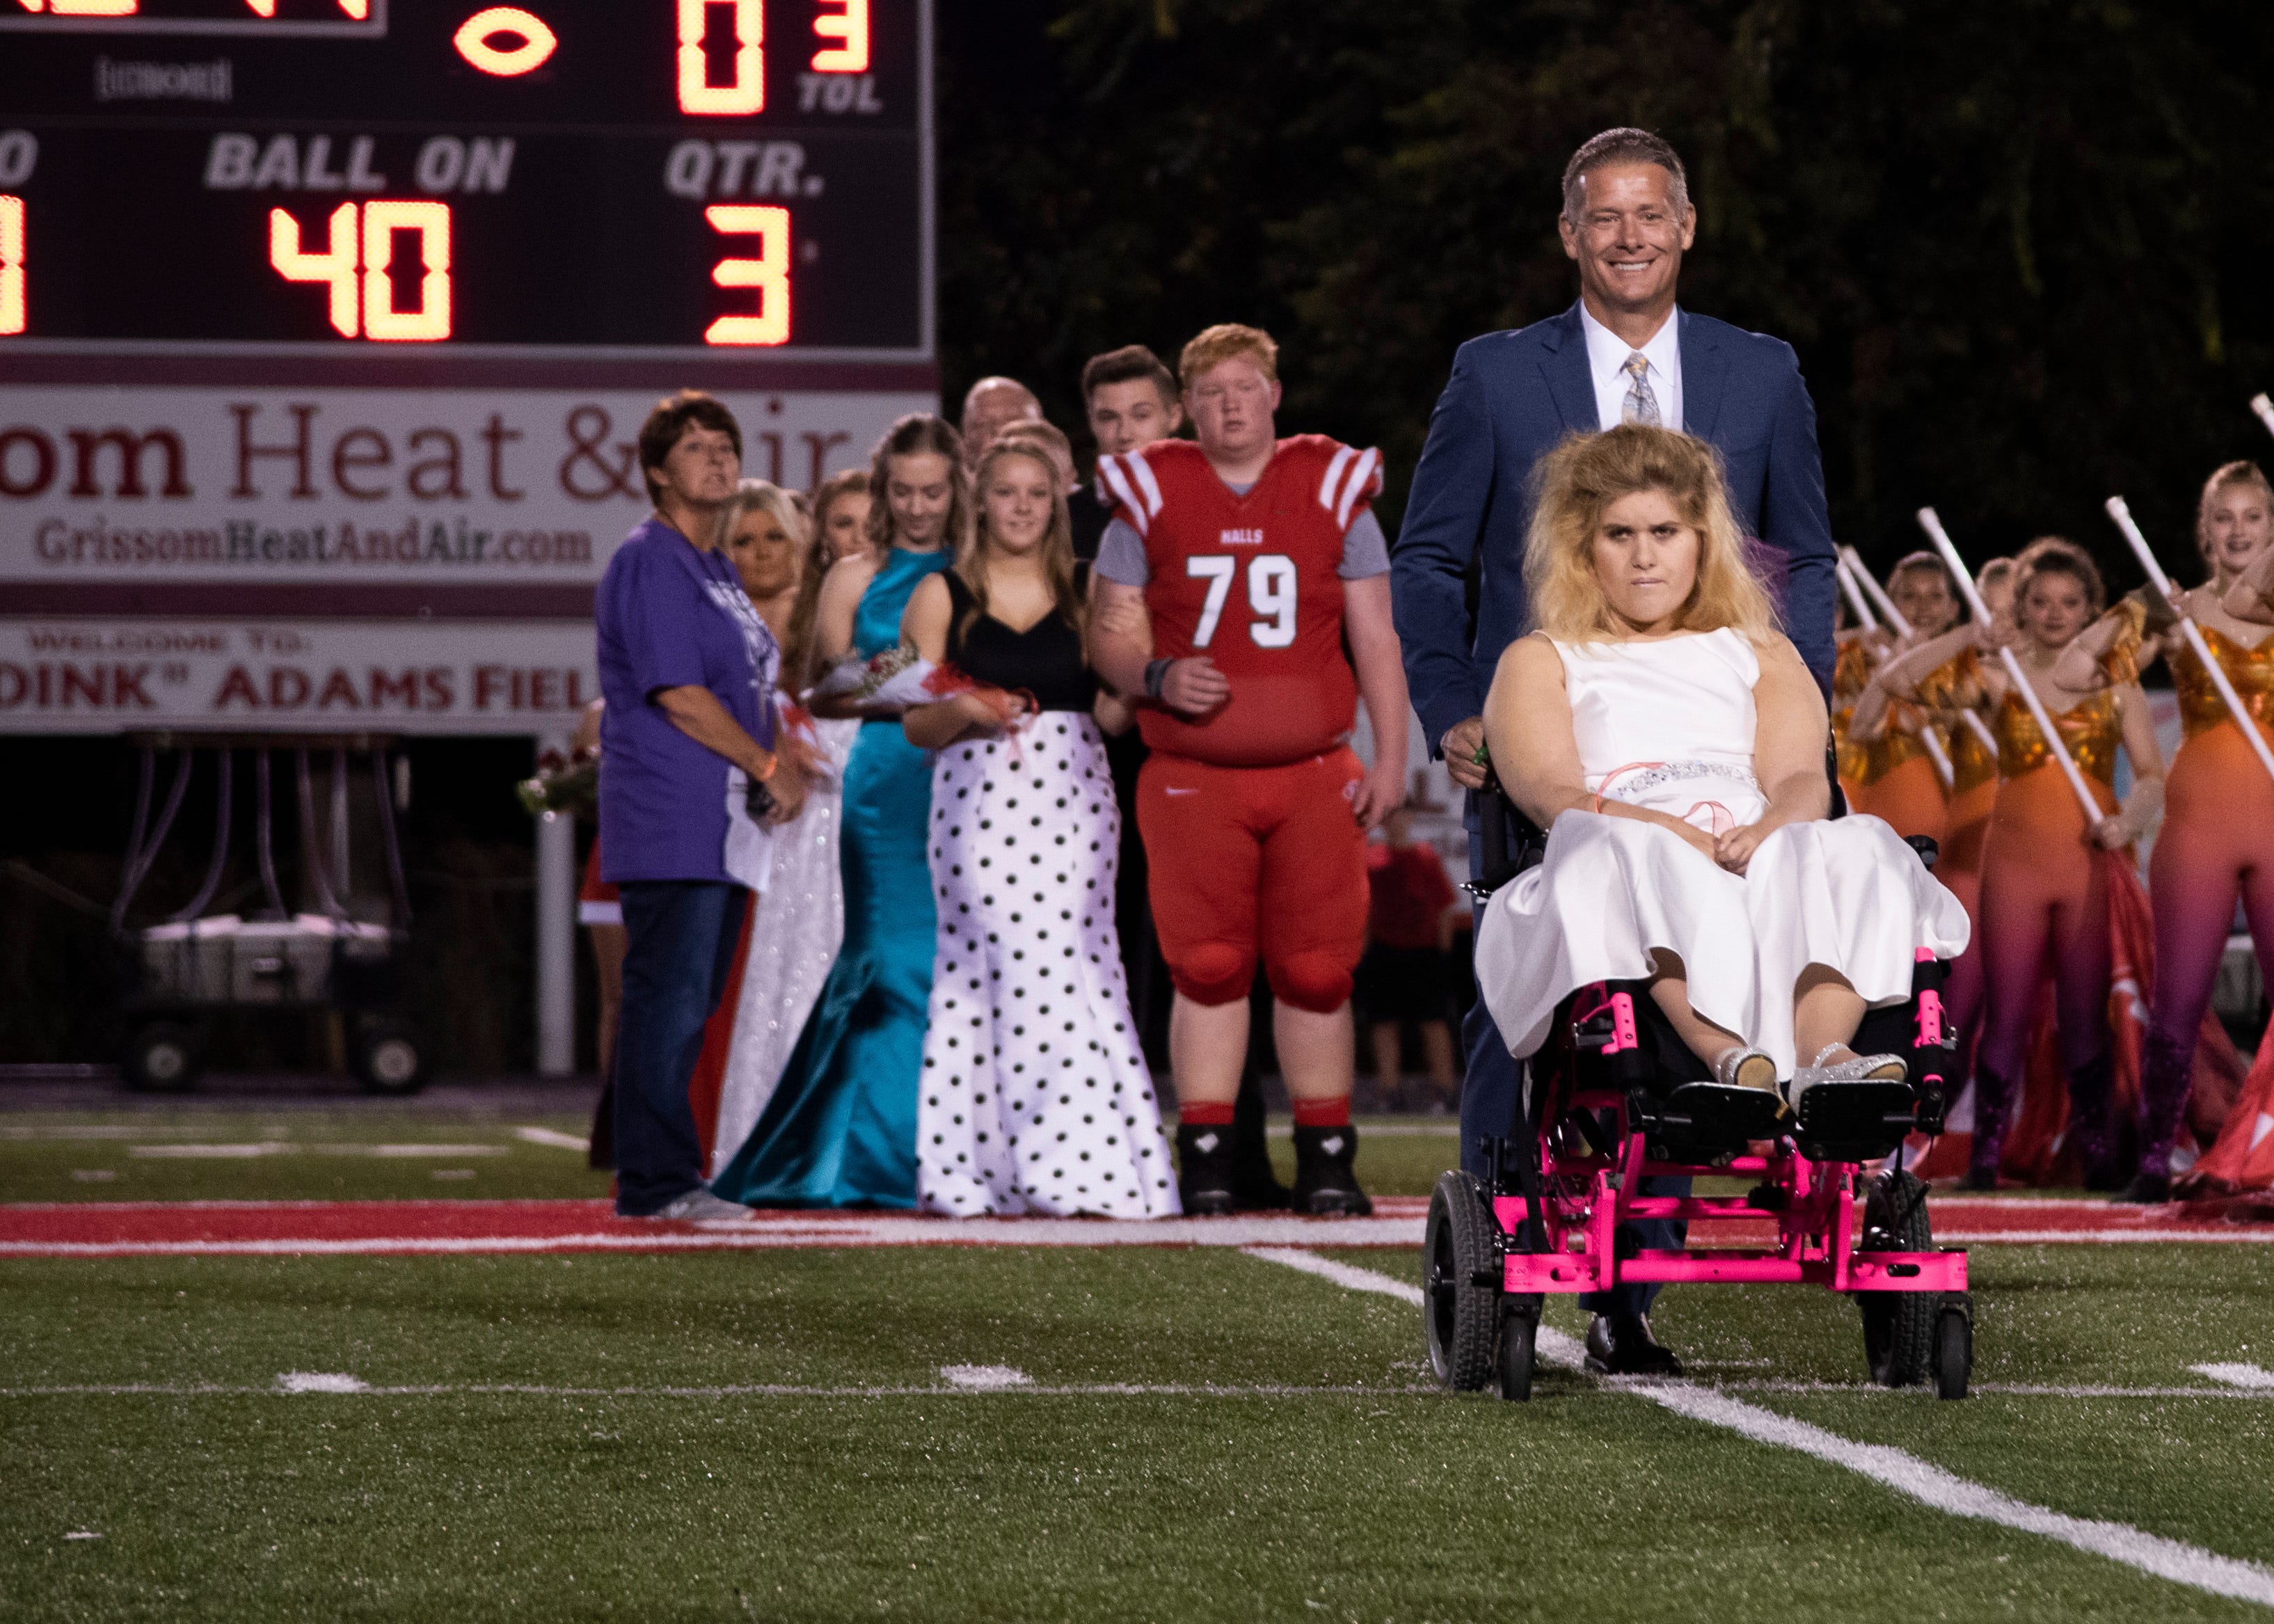 Halls homecoming court member, Blakeley Irwin, is escorted to the field during the Halls and Central high school football game on Friday, October 4, 2019 at Halls High School.